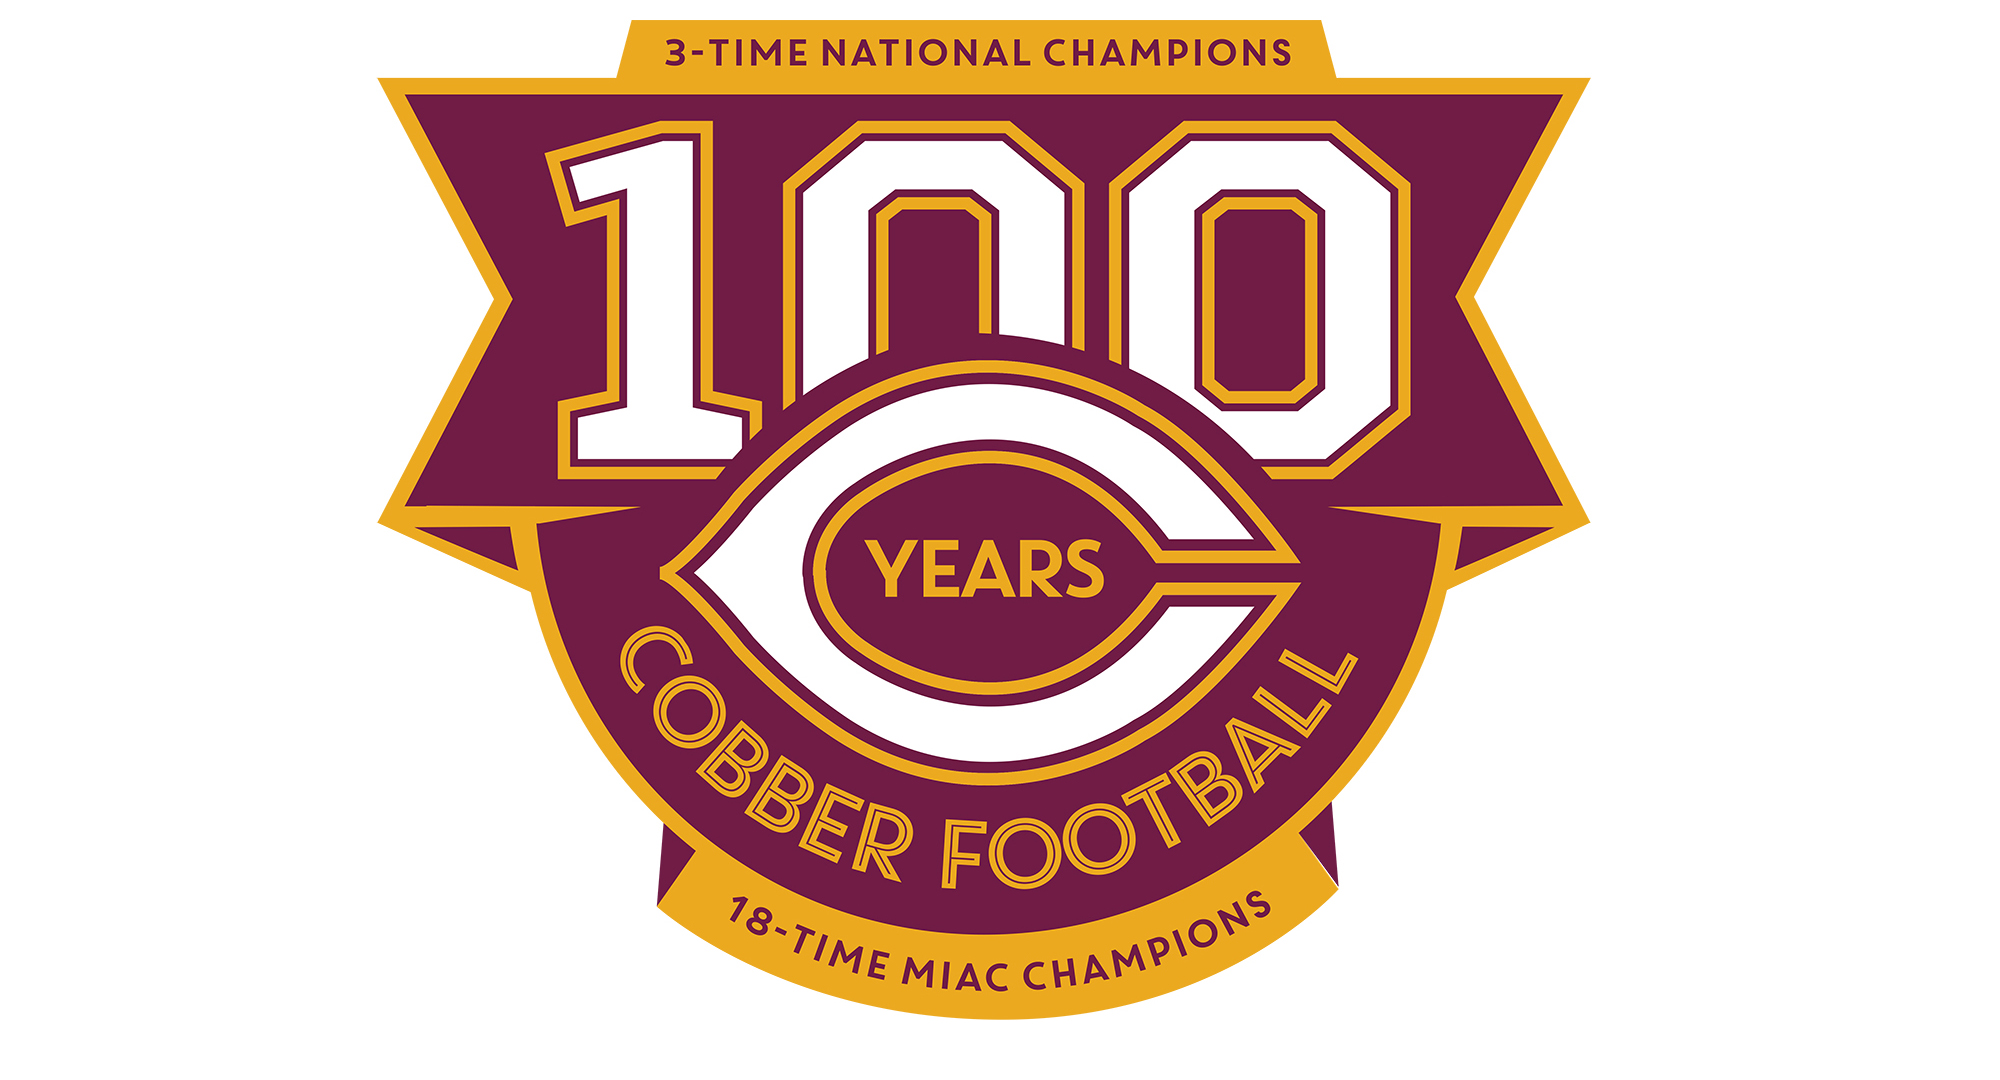 100th Year Of Cobber Football